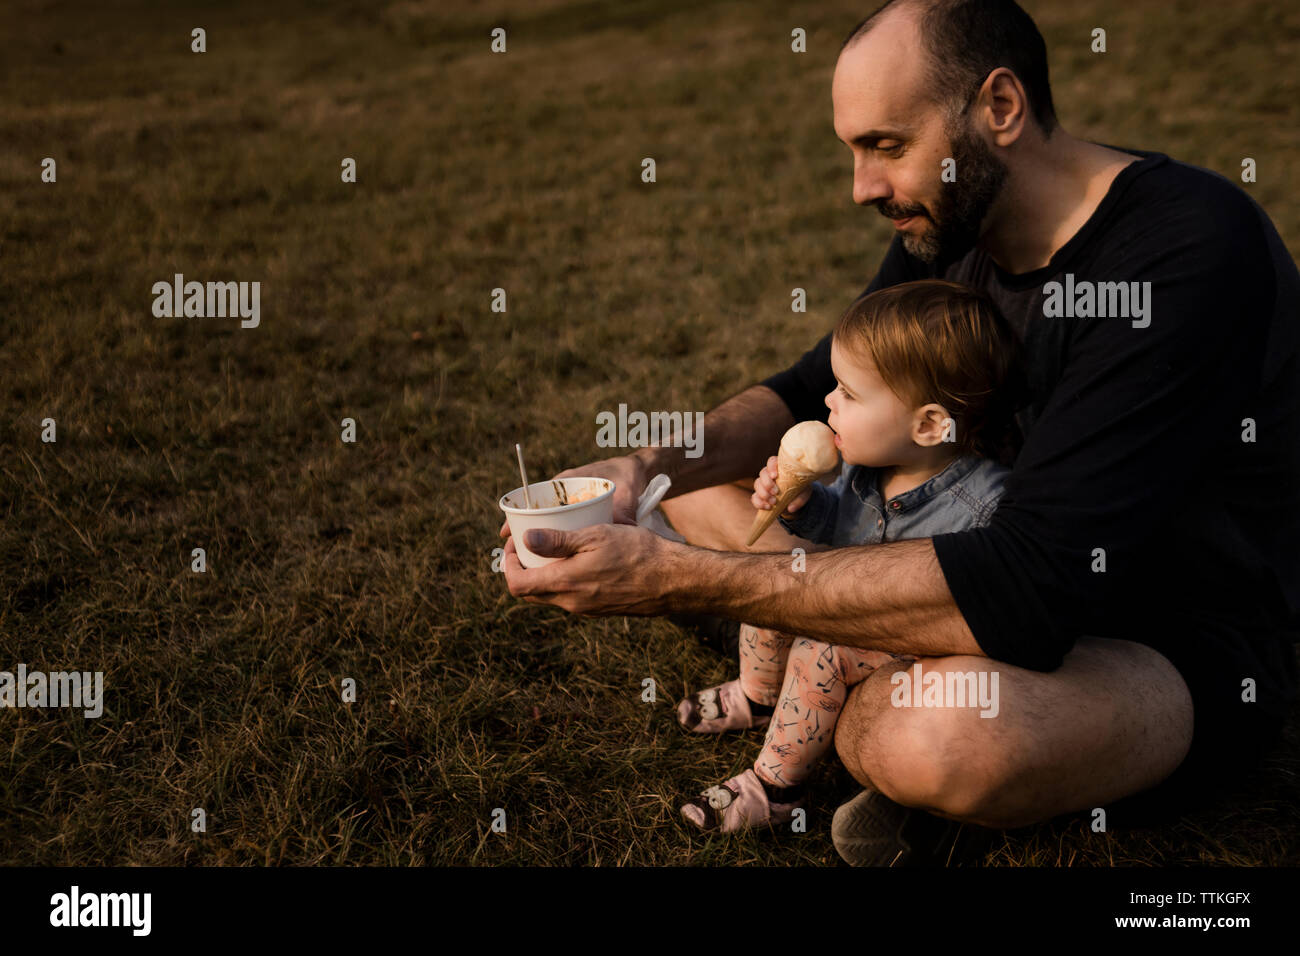 Dad and daughter eating ice cream on a hill in the summer Stock Photo